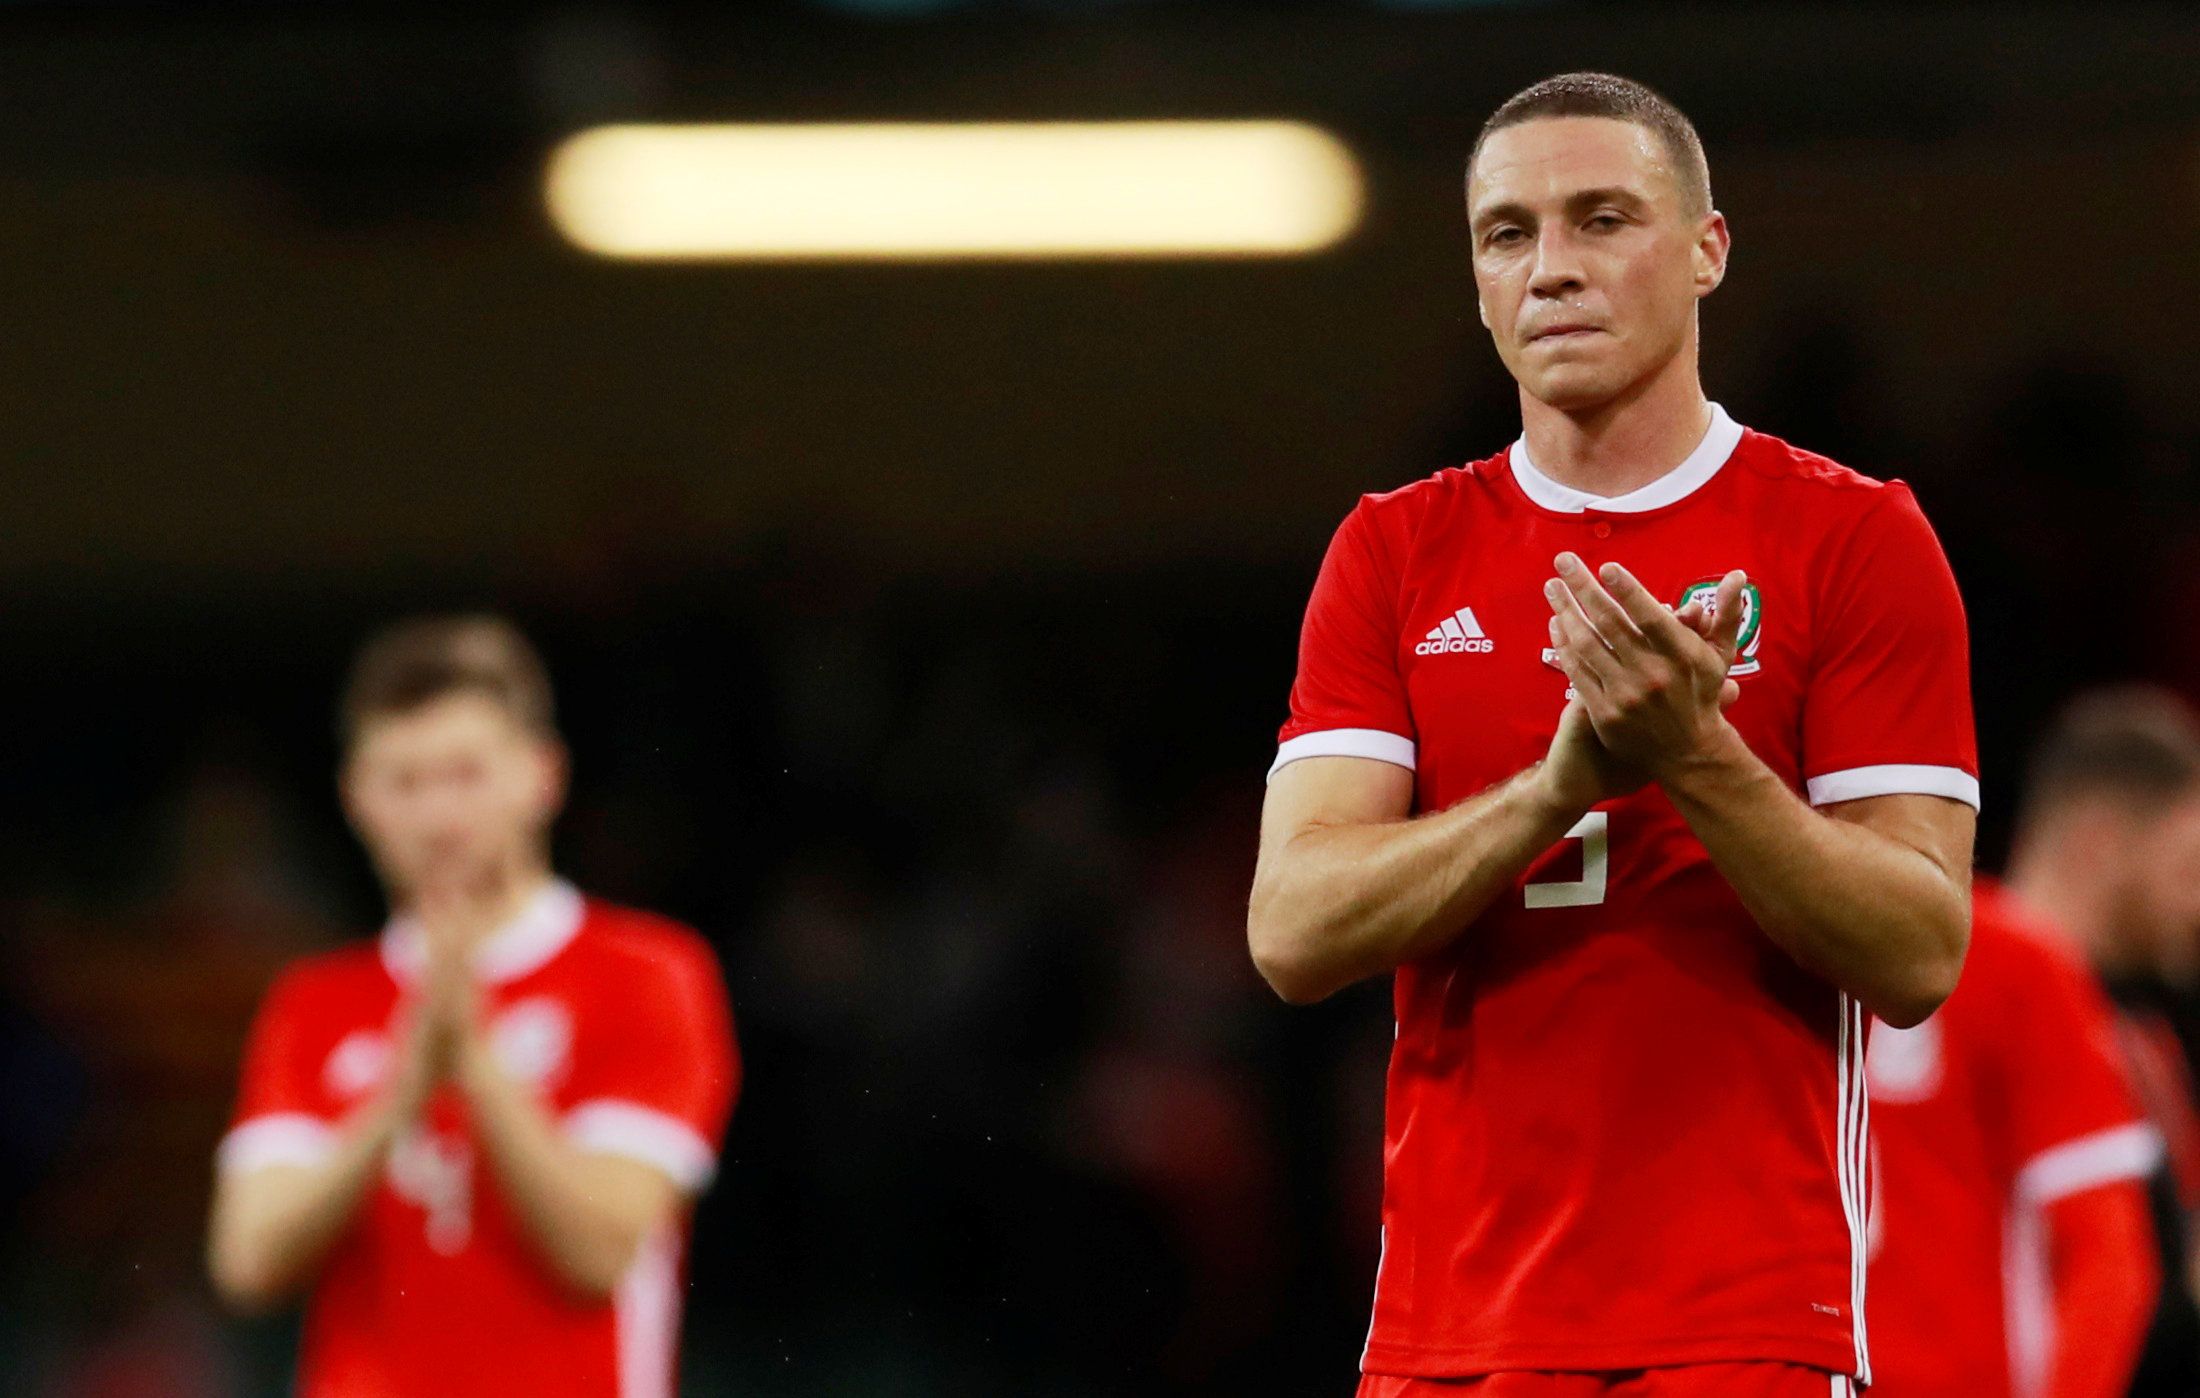 Soccer Football - International Friendly - Wales v Spain - Principality Stadium, Cardiff, Britain - October 11, 2018  Wales' James Chester applauds their fans after the match   Action Images via Reuters/Andrew Couldridge